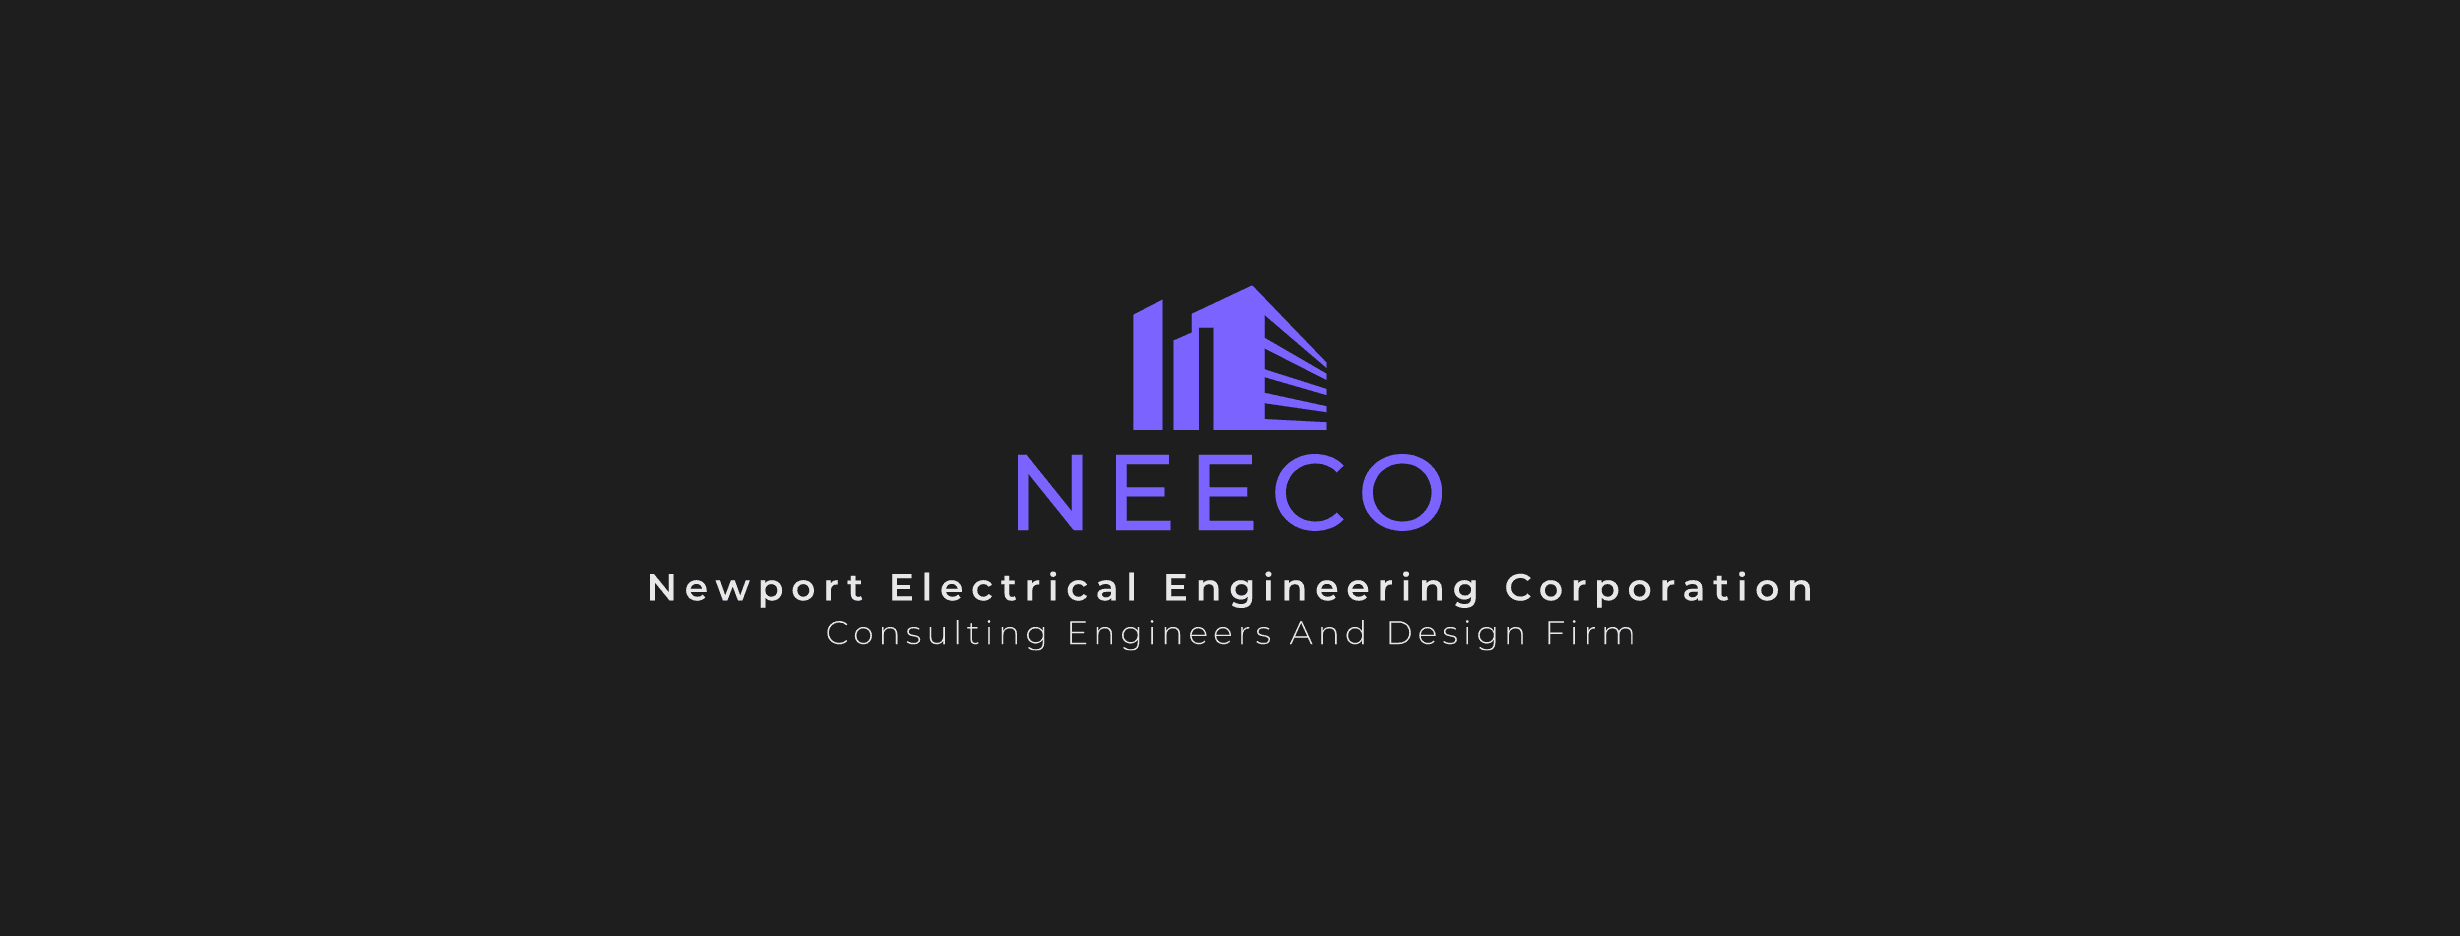 Product Services | Newport Electrical Engineering Corporation image